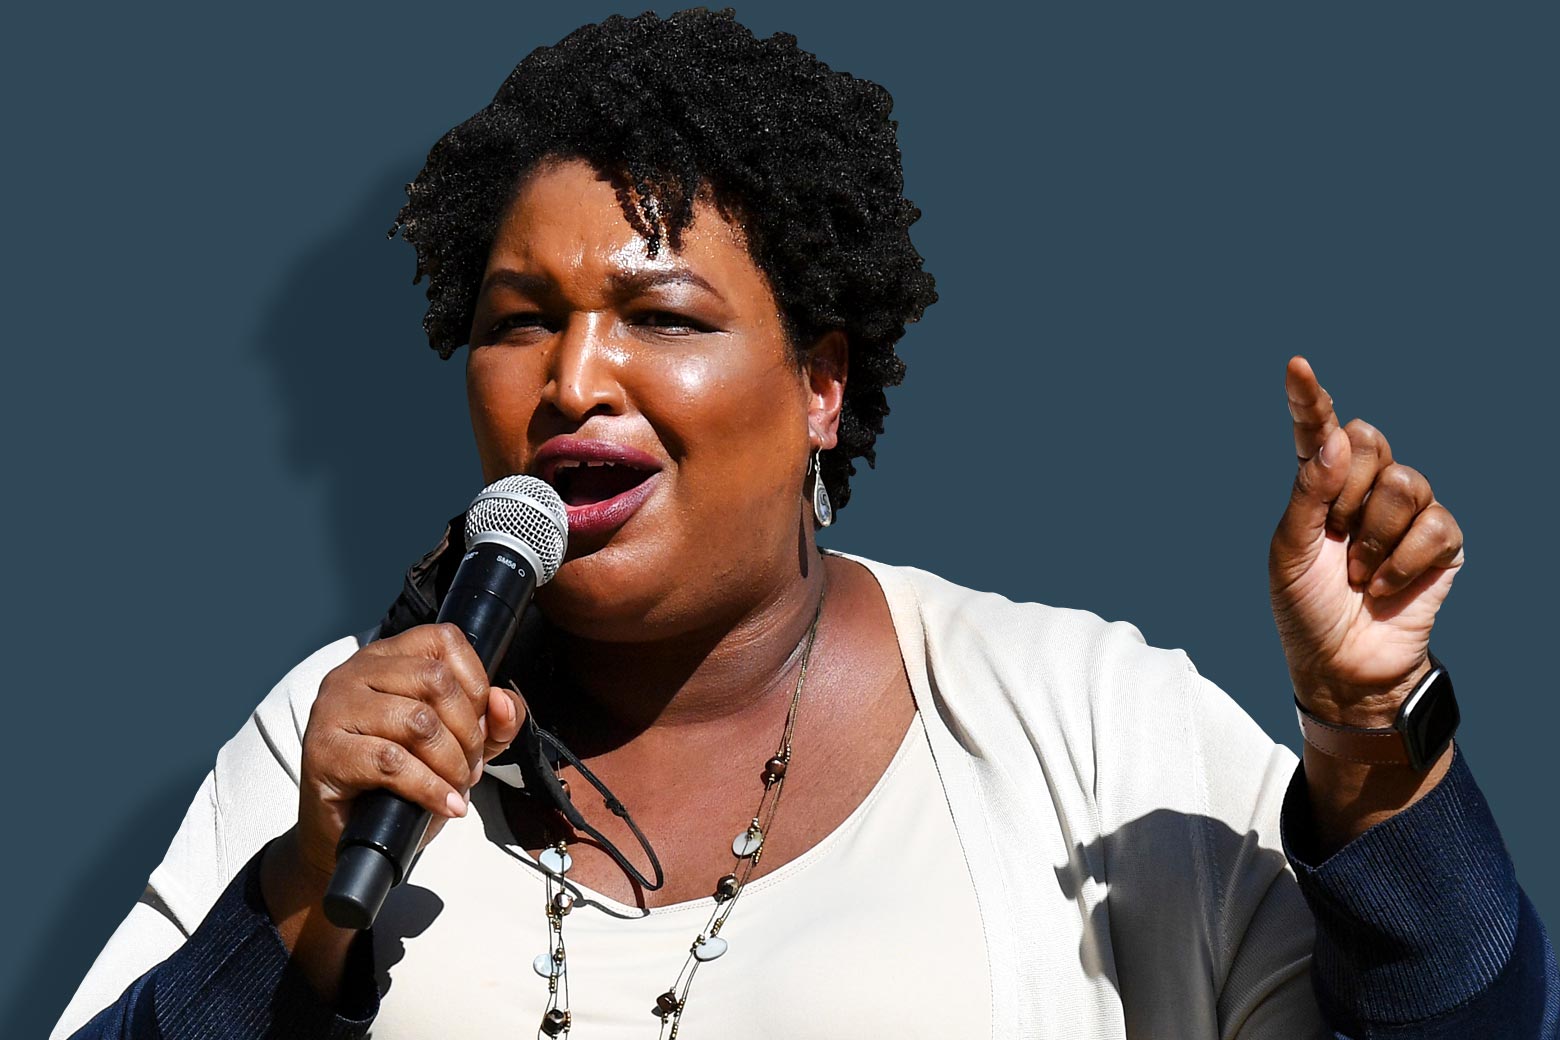 Stacey Abrams speaks, holding a mic in one hand and pointing with the other hand